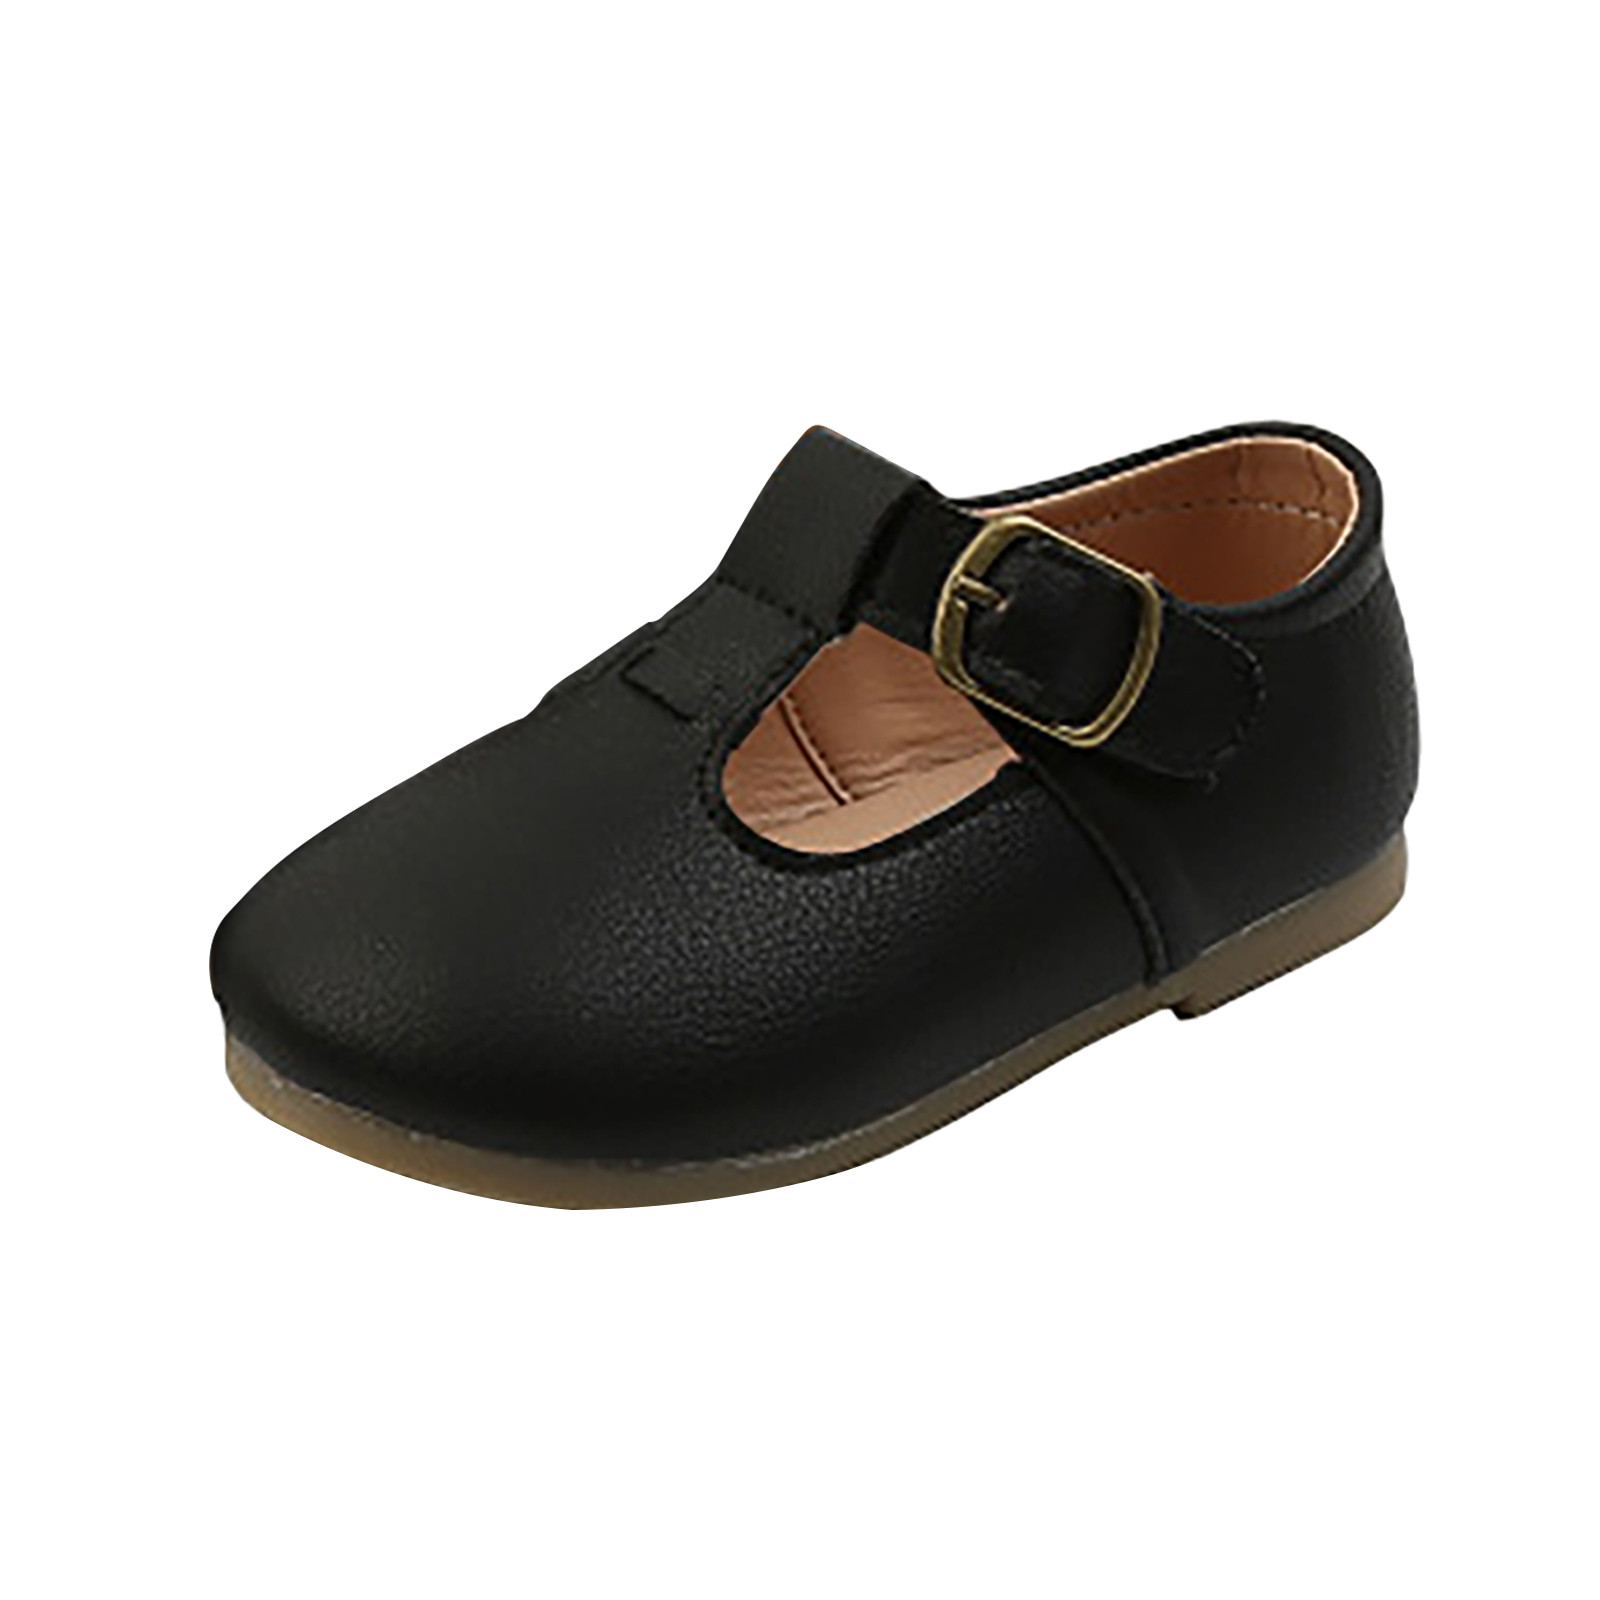 Children-Leather-Shoes-Girls-Boys-Non-slip-T-Buckle-Strap-Flats-Baby-Shoes-Infant-First-Walkers-2